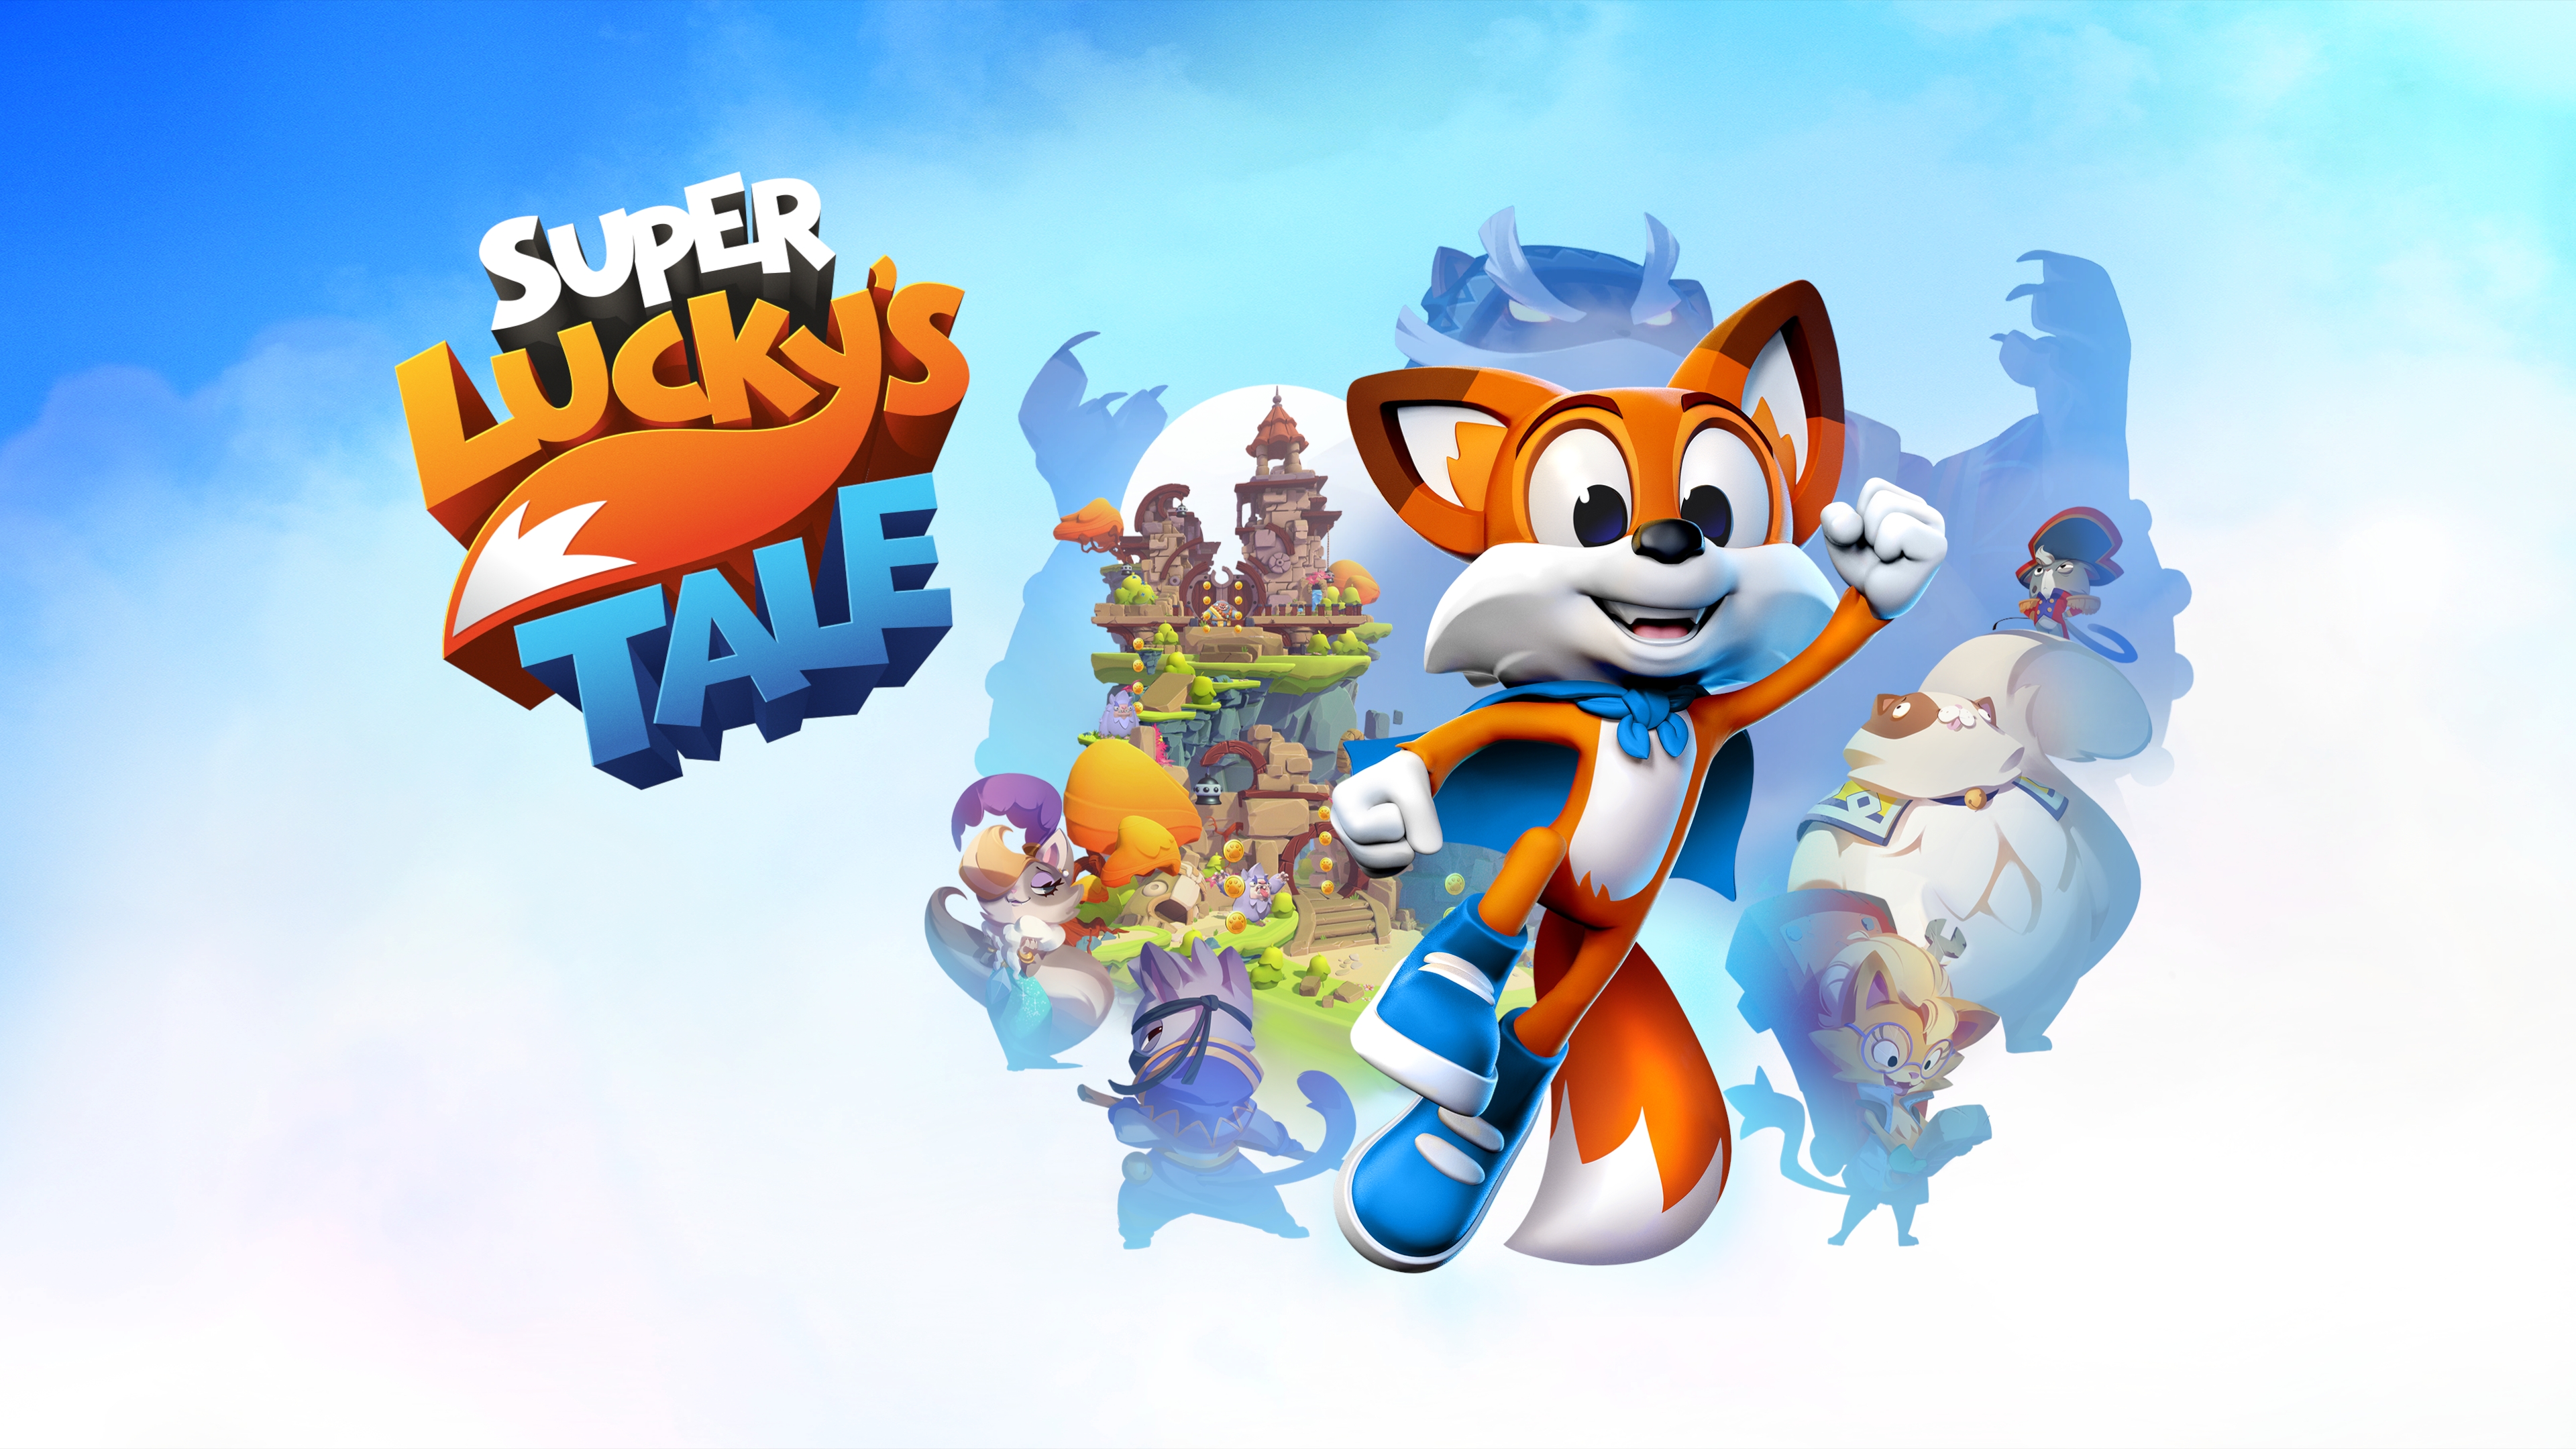 New lucky tale